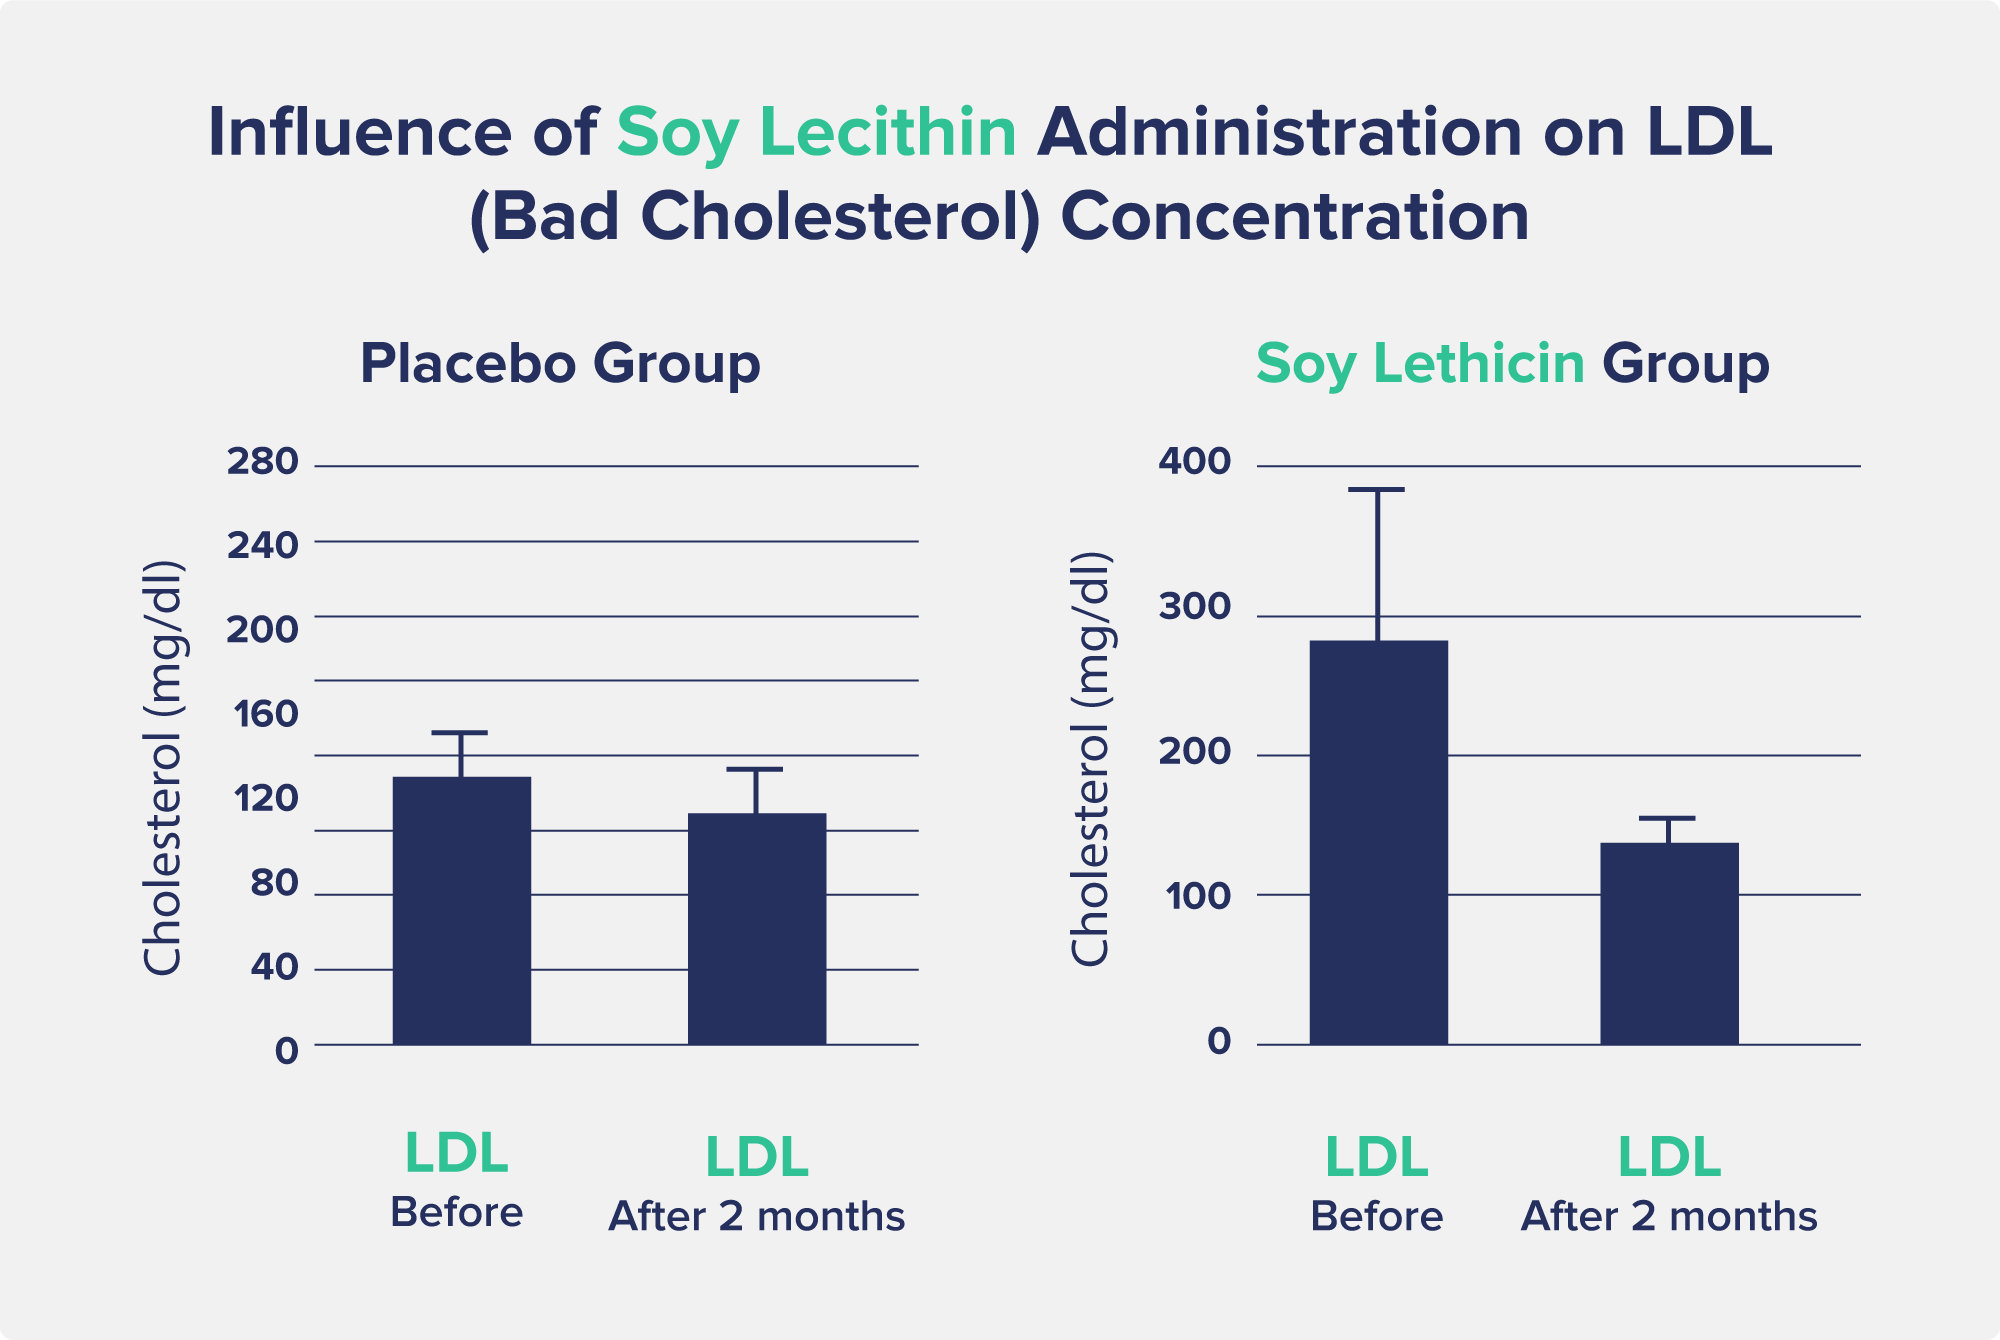 Two graphs entitled "Influence of Soy Lecithin Administration on LDL (Bad Cholesterol) Concentration" One graph represents the placebo group, and the other represents the soy lecithin group.